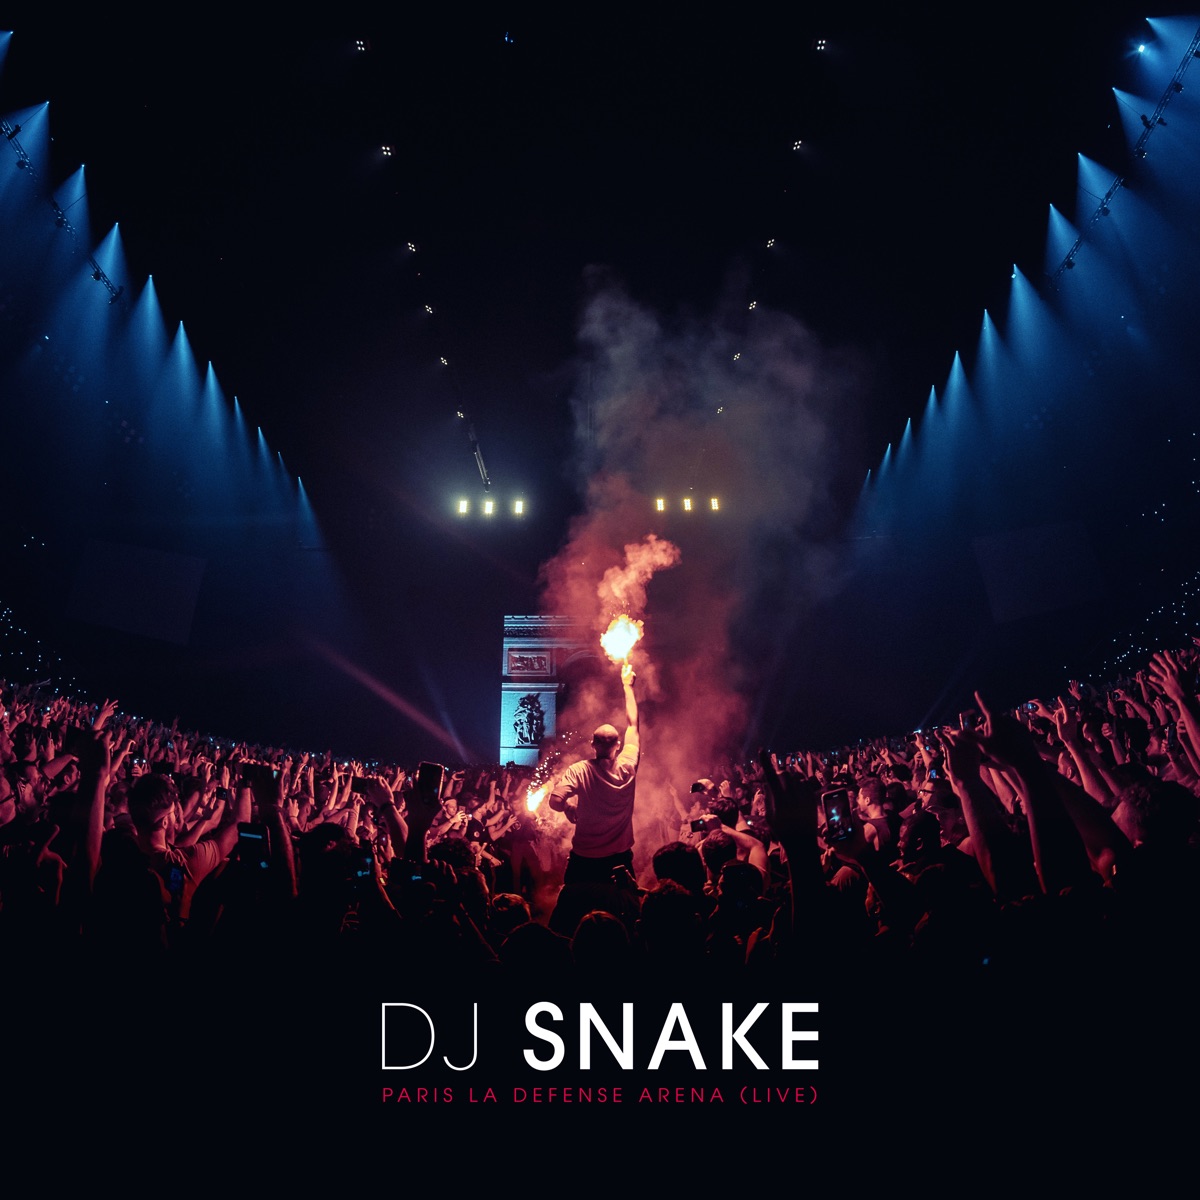 Carte Blanche (Deluxe) - Album by DJ Snake - Apple Music